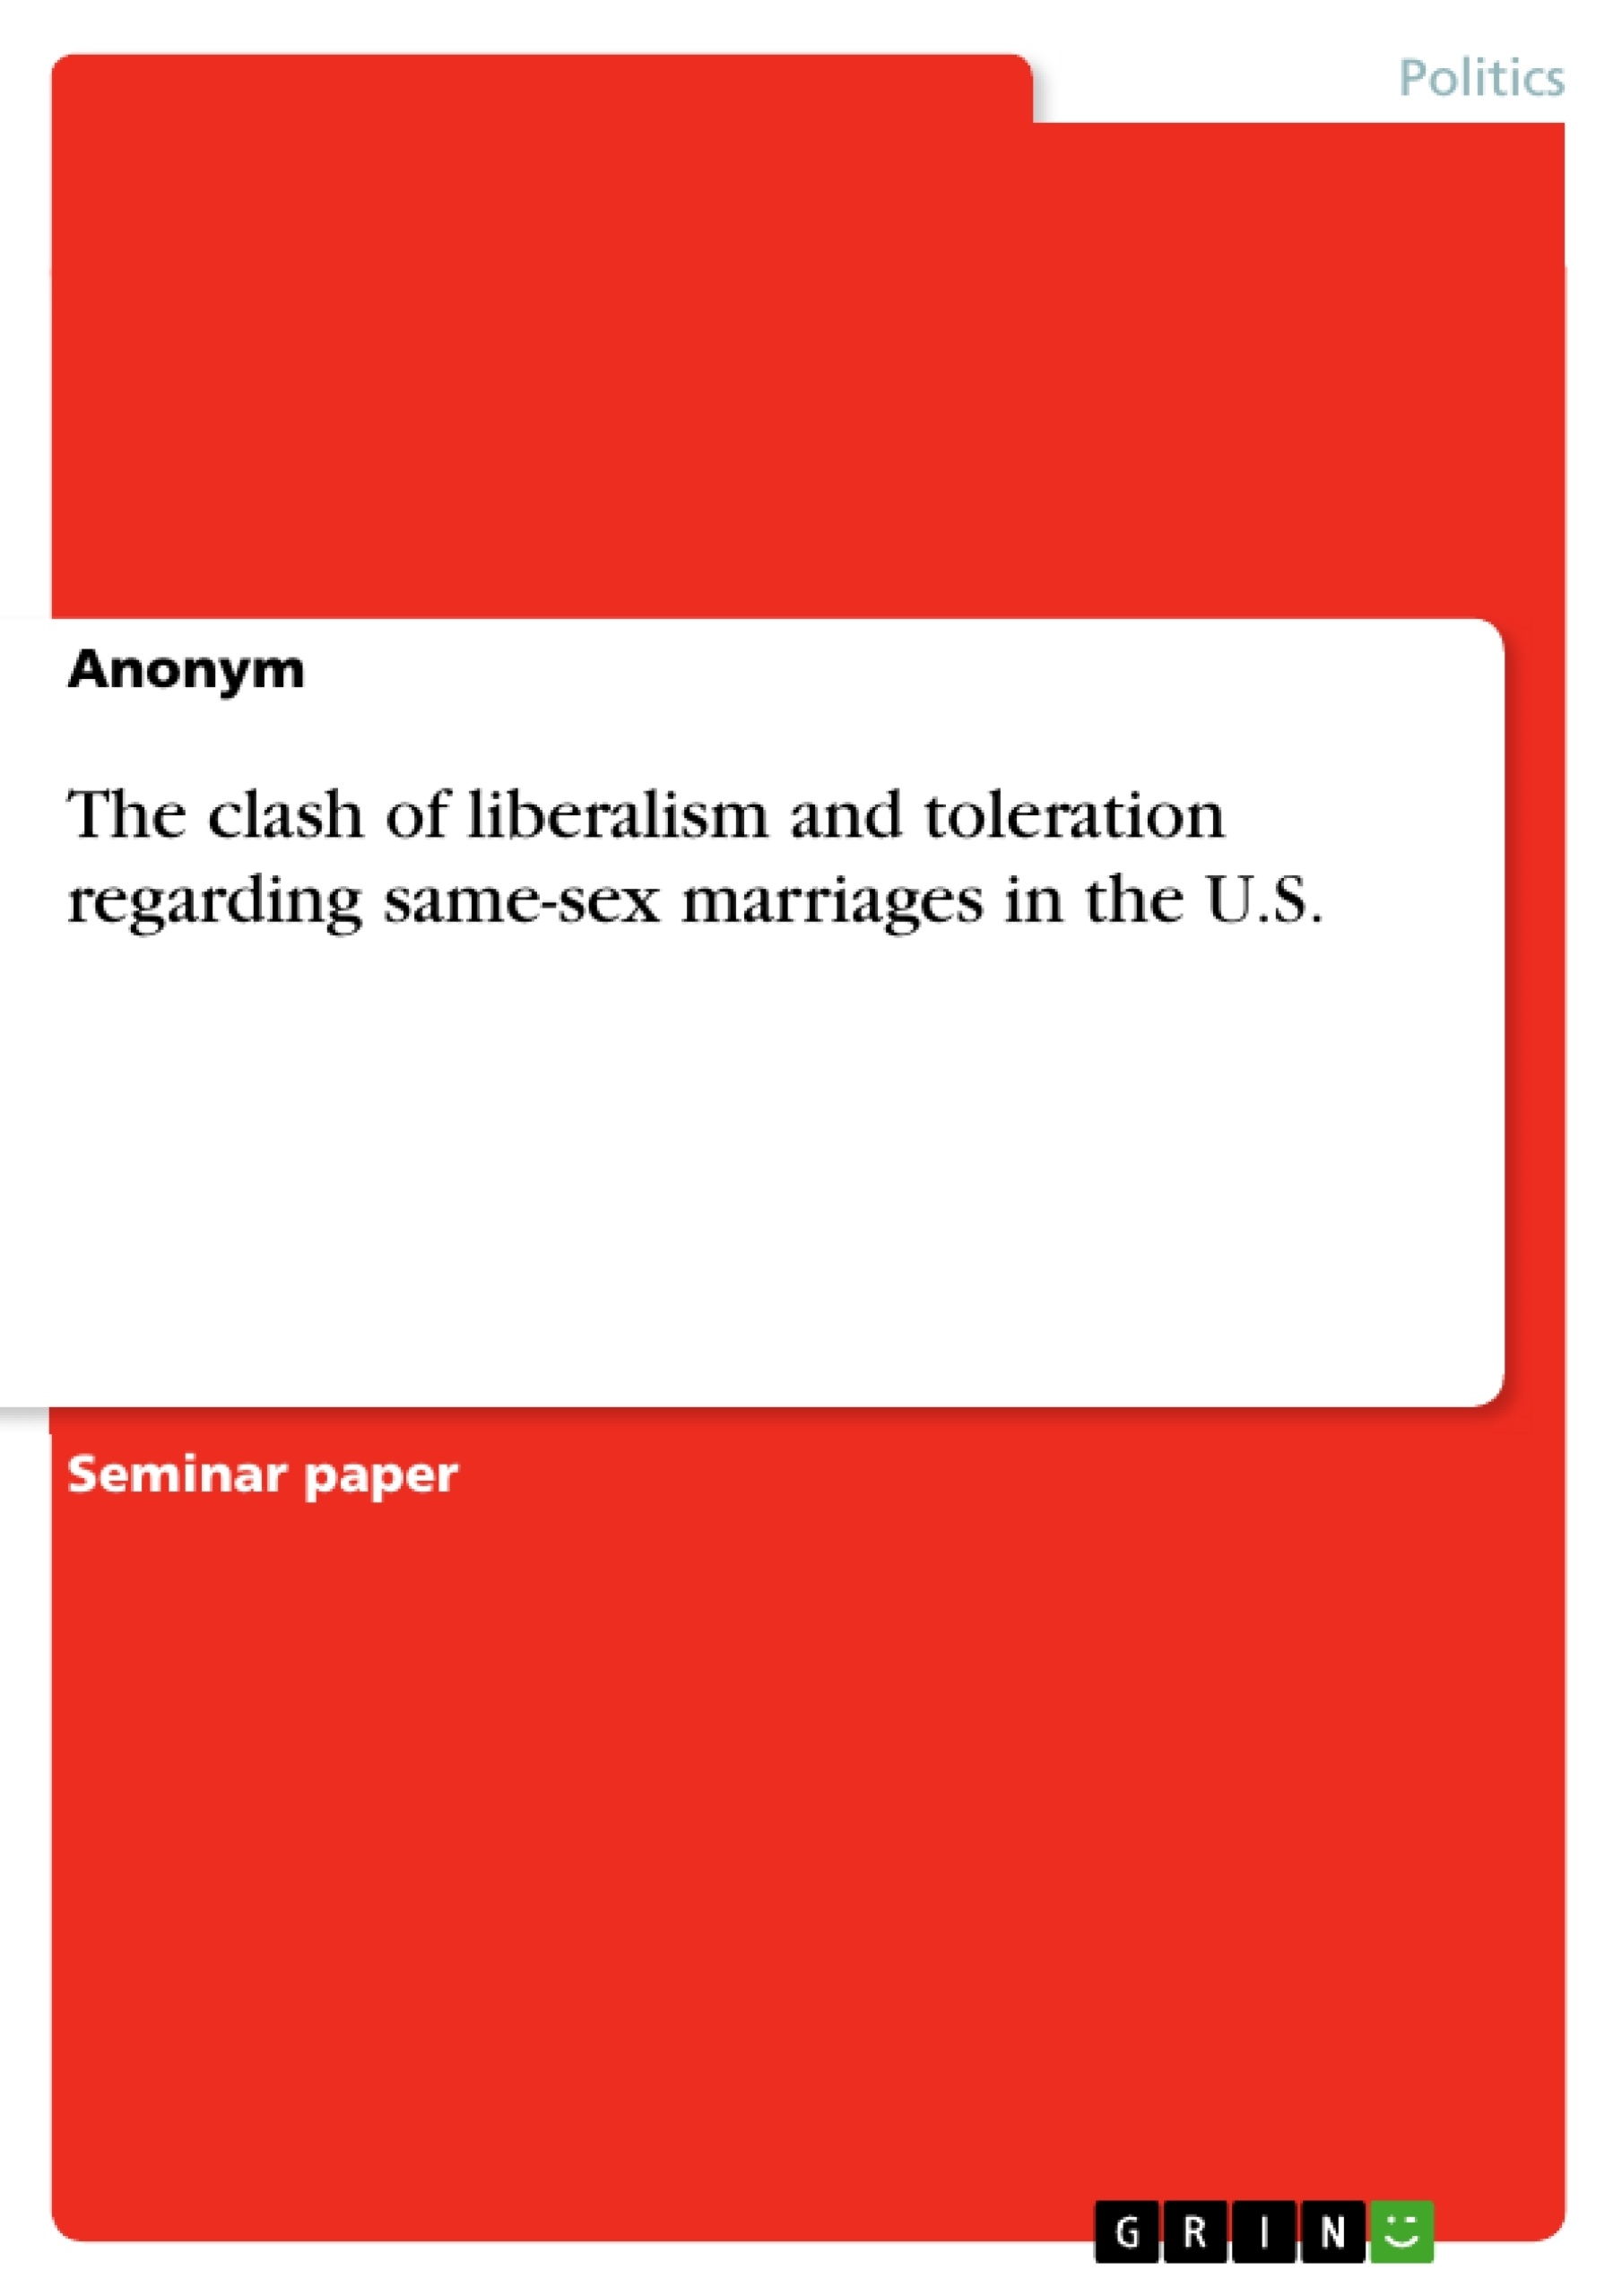 Title: The clash of liberalism and toleration regarding same-sex marriages in the U.S.